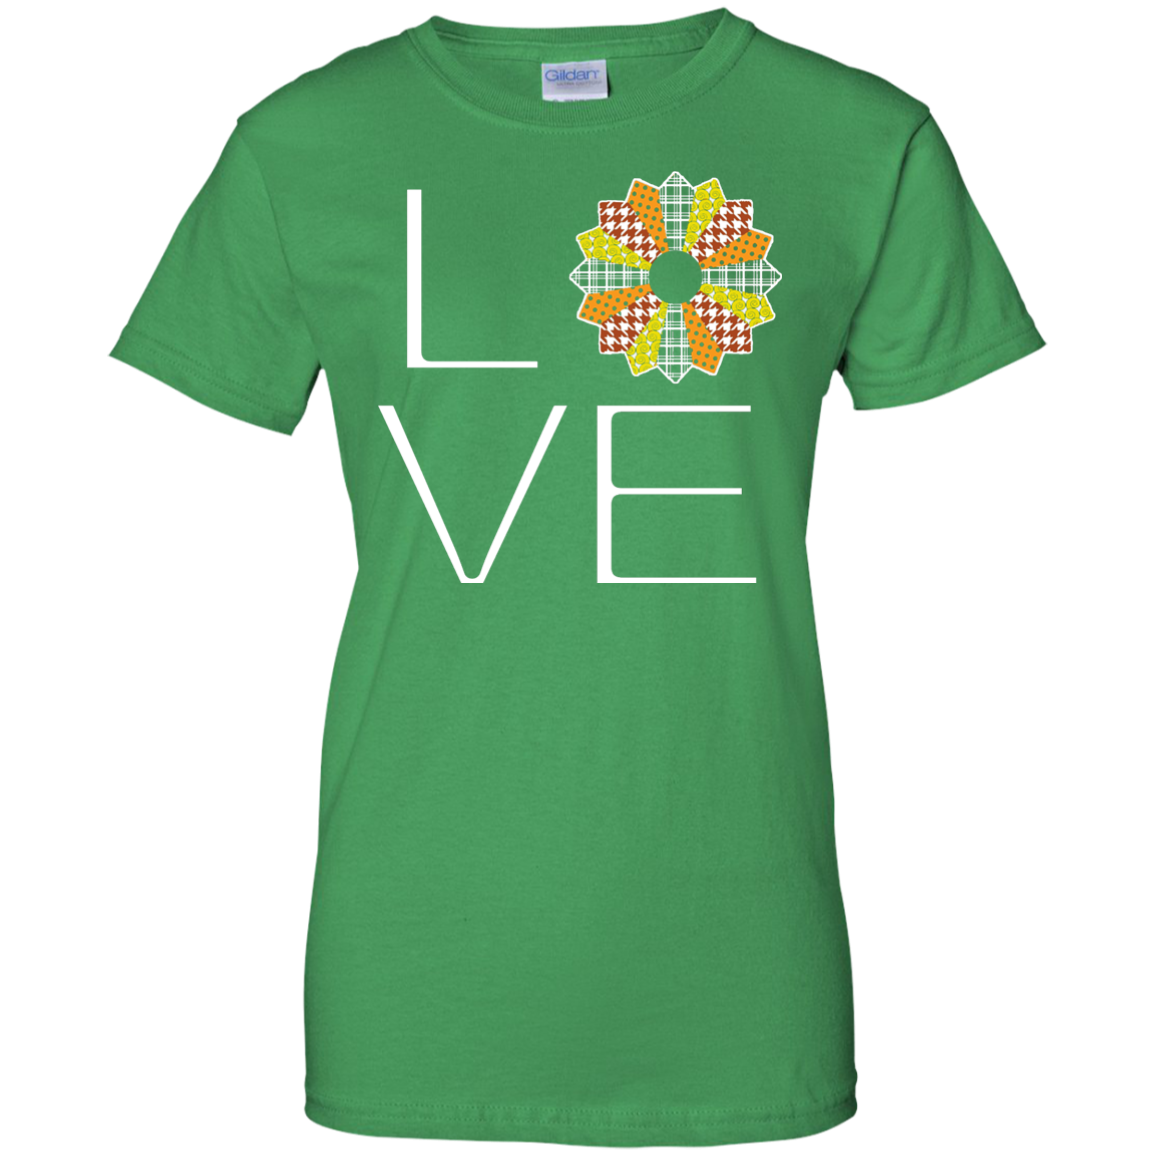 LOVE Quilting (Fall Colors) Ladies Custom 100% Cotton T-Shirt - Crafter4Life - 8